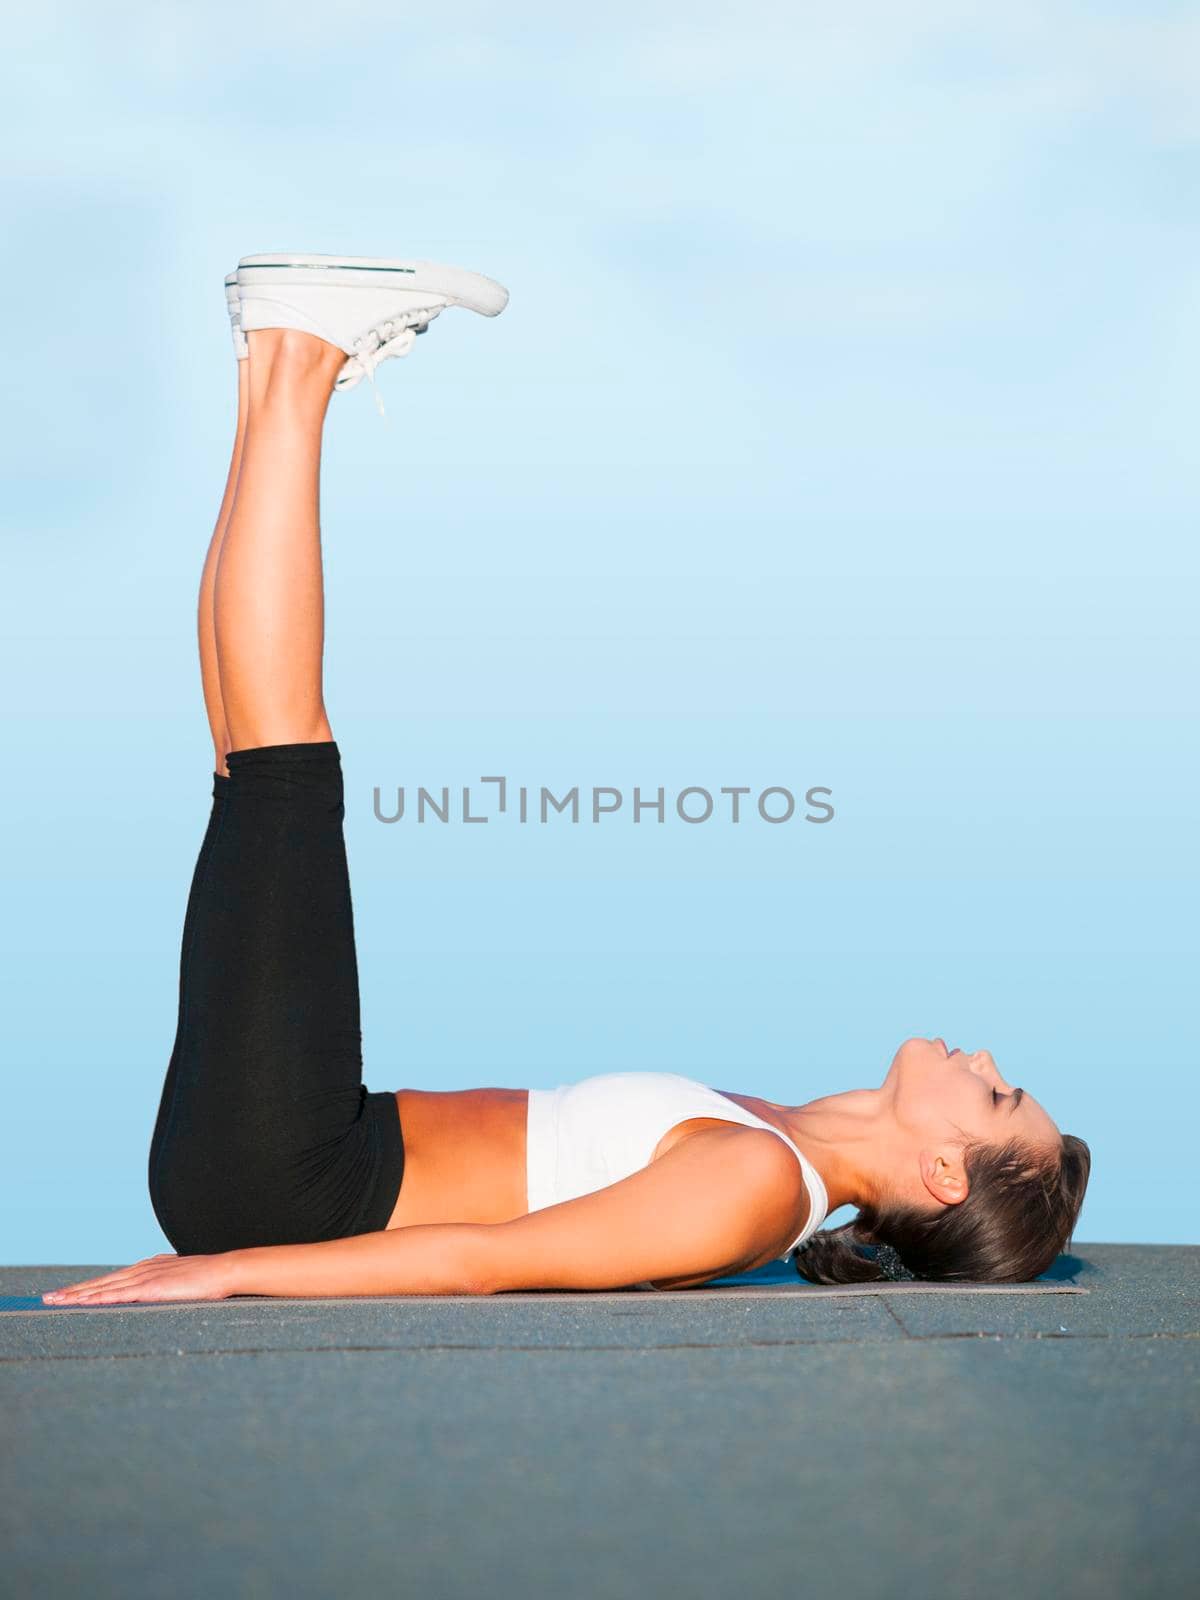 A young woman doing yoga outdoors against a blue sky.